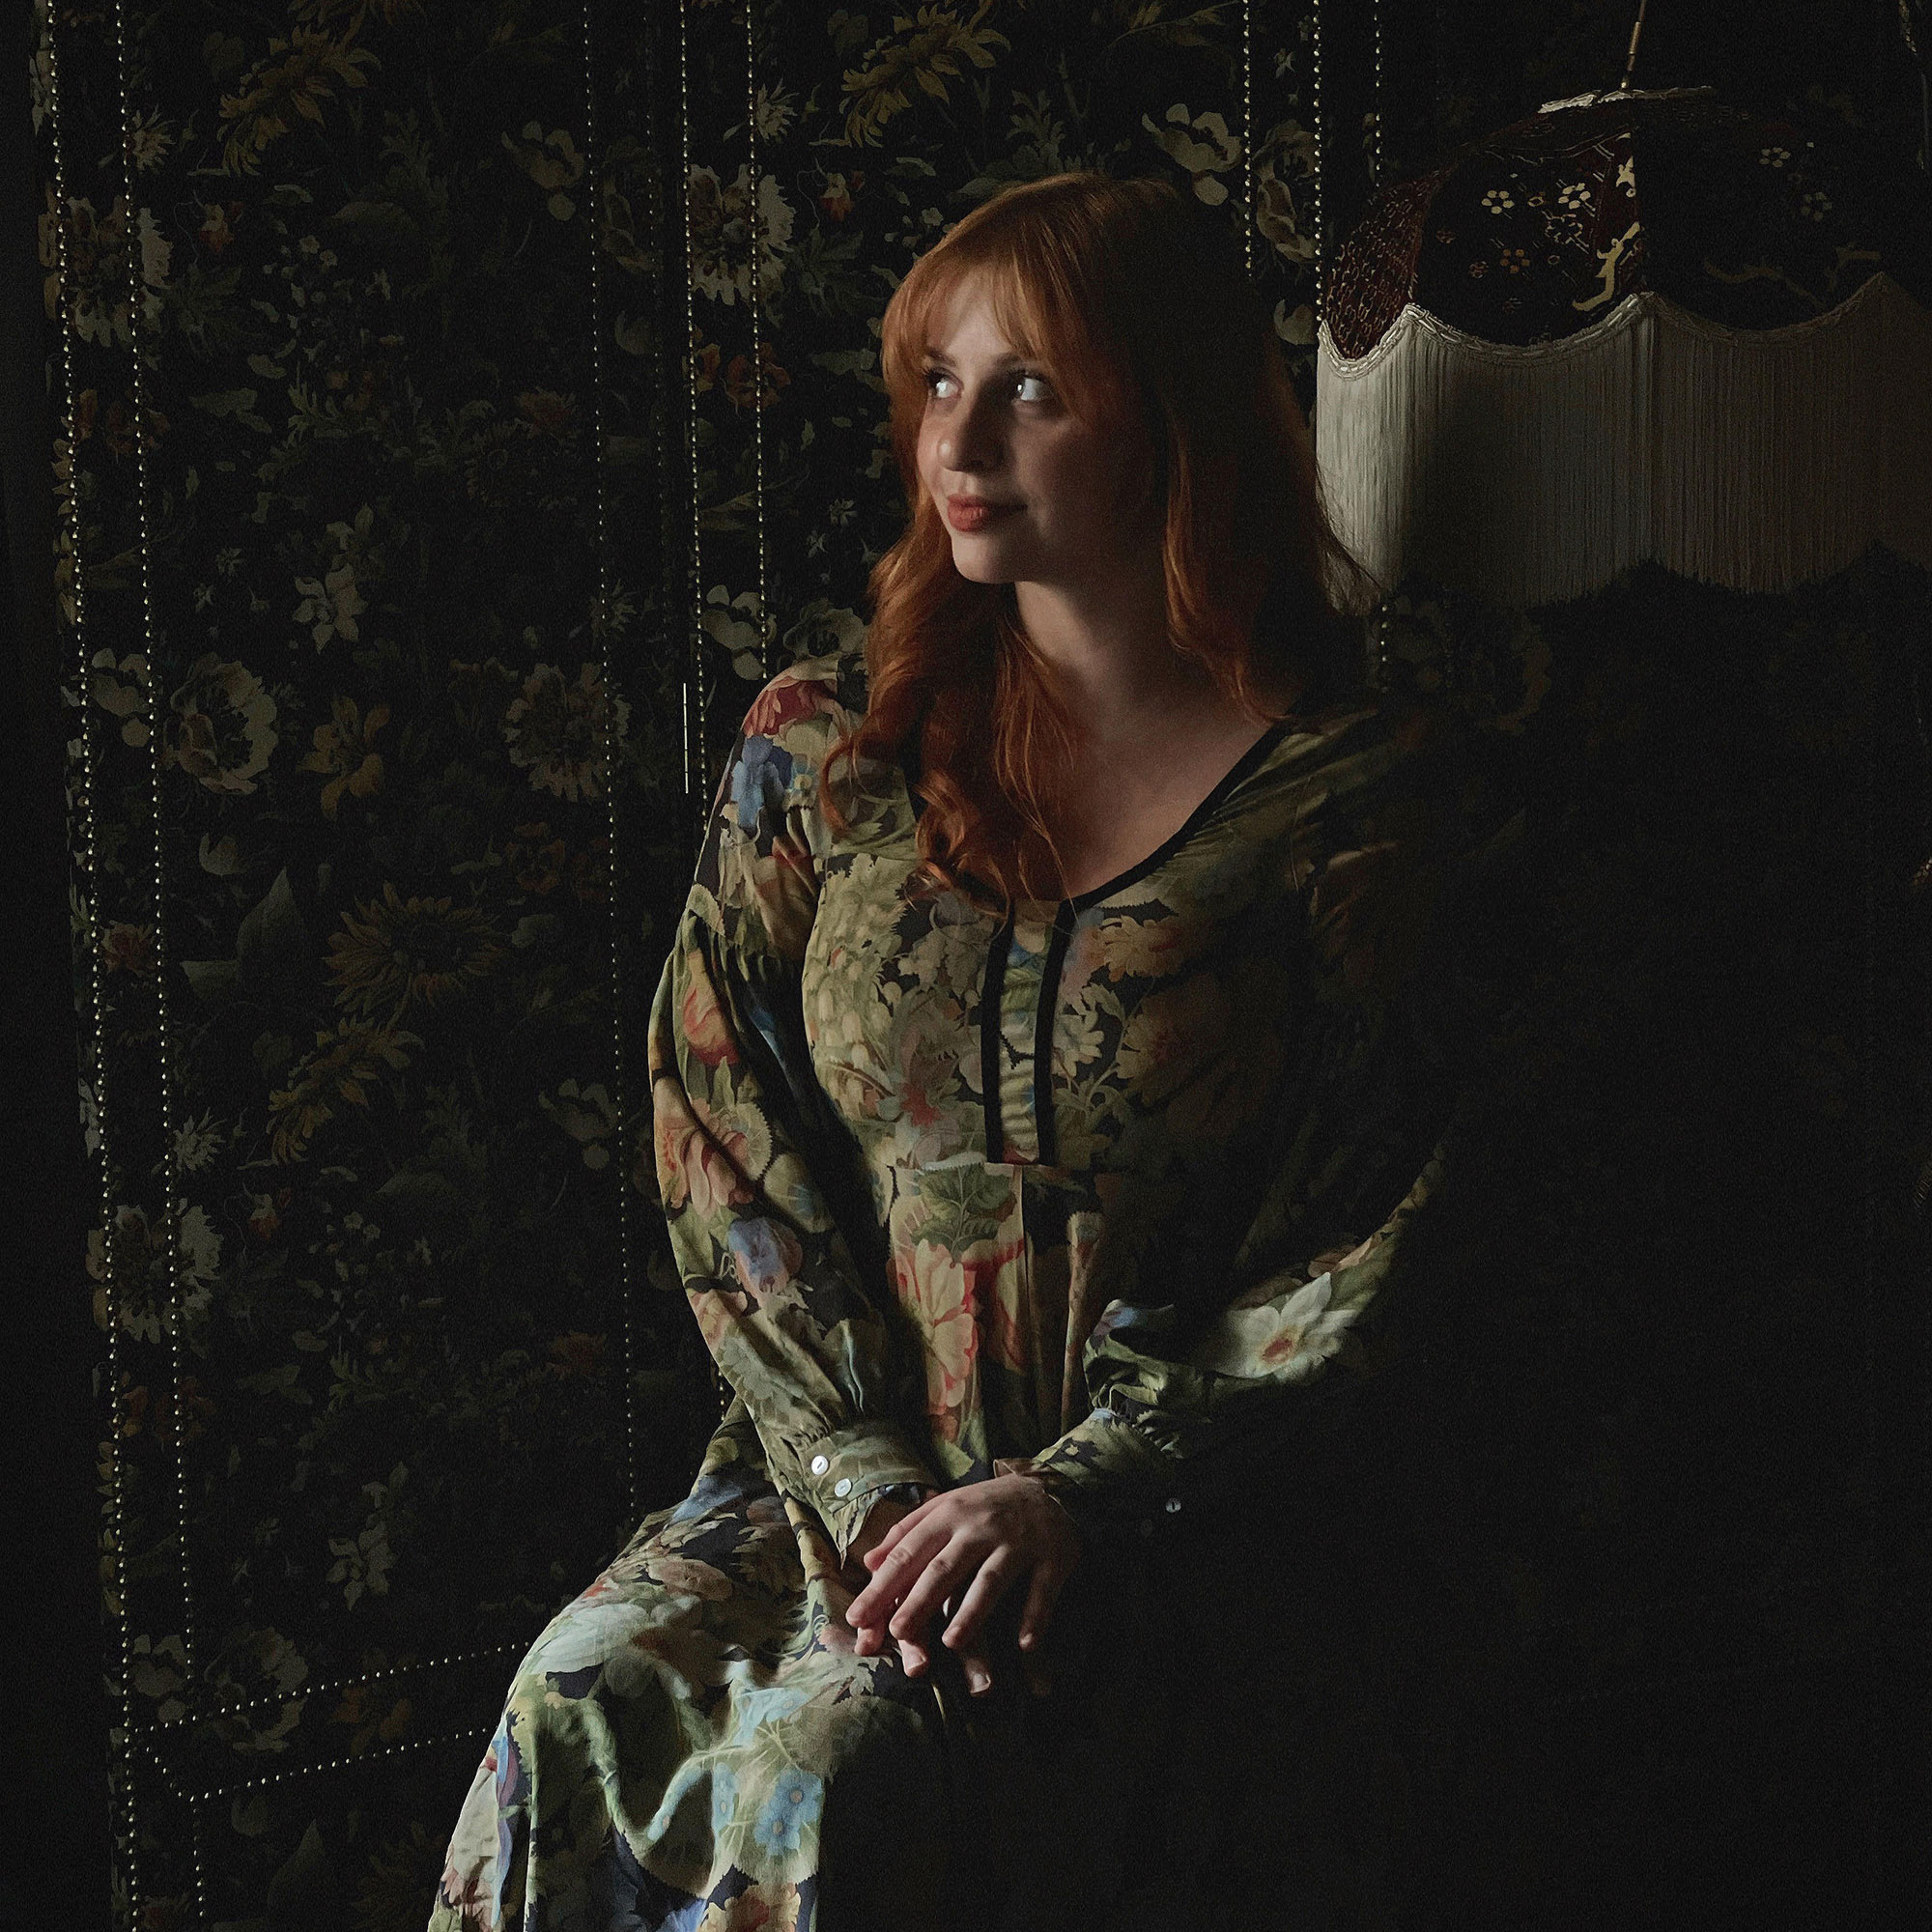 White woman with red hair in long floral dress in dark floral room is Maggie Samson from House of Hackney